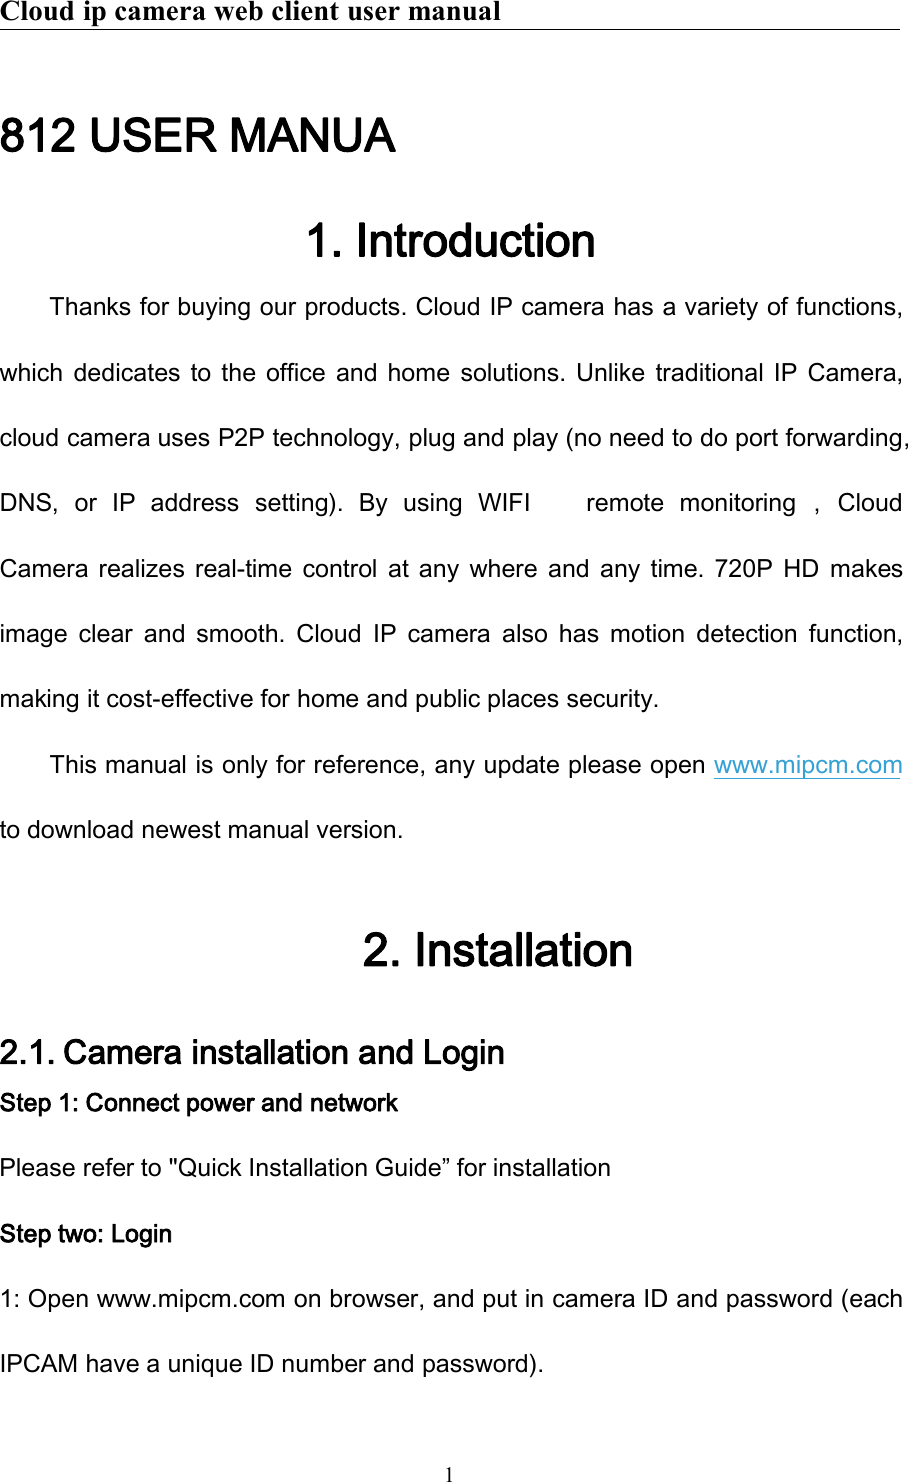 Cloud ip camera web client user manual1812 USER MANUA1. IntroductionThanks for buying our products. Cloud IP camera has a variety of functions,which dedicates to the office and home solutions. Unlike traditional IP Camera,cloud camera uses P2P technology, plug and play (no need to do port forwarding,DNS, or IP address setting). By using WIFI remote monitoring ， CloudCamera realizes real-time control at any where and any time. 720P HD makesimage clear and smooth. Cloud IP camera also has motion detection function,making it cost-effective for home and public places security.This manual is only for reference, any update please open www.mipcm.comto download newest manual version.2. Installation2.1. Camera installation and LoginStep 1: Connect power and networkPlease refer to &quot;Quick Installation Guide” for installationStep two: Login1: Open www.mipcm.com on browser, and put in camera ID and password (eachIPCAM have a unique ID number and password).